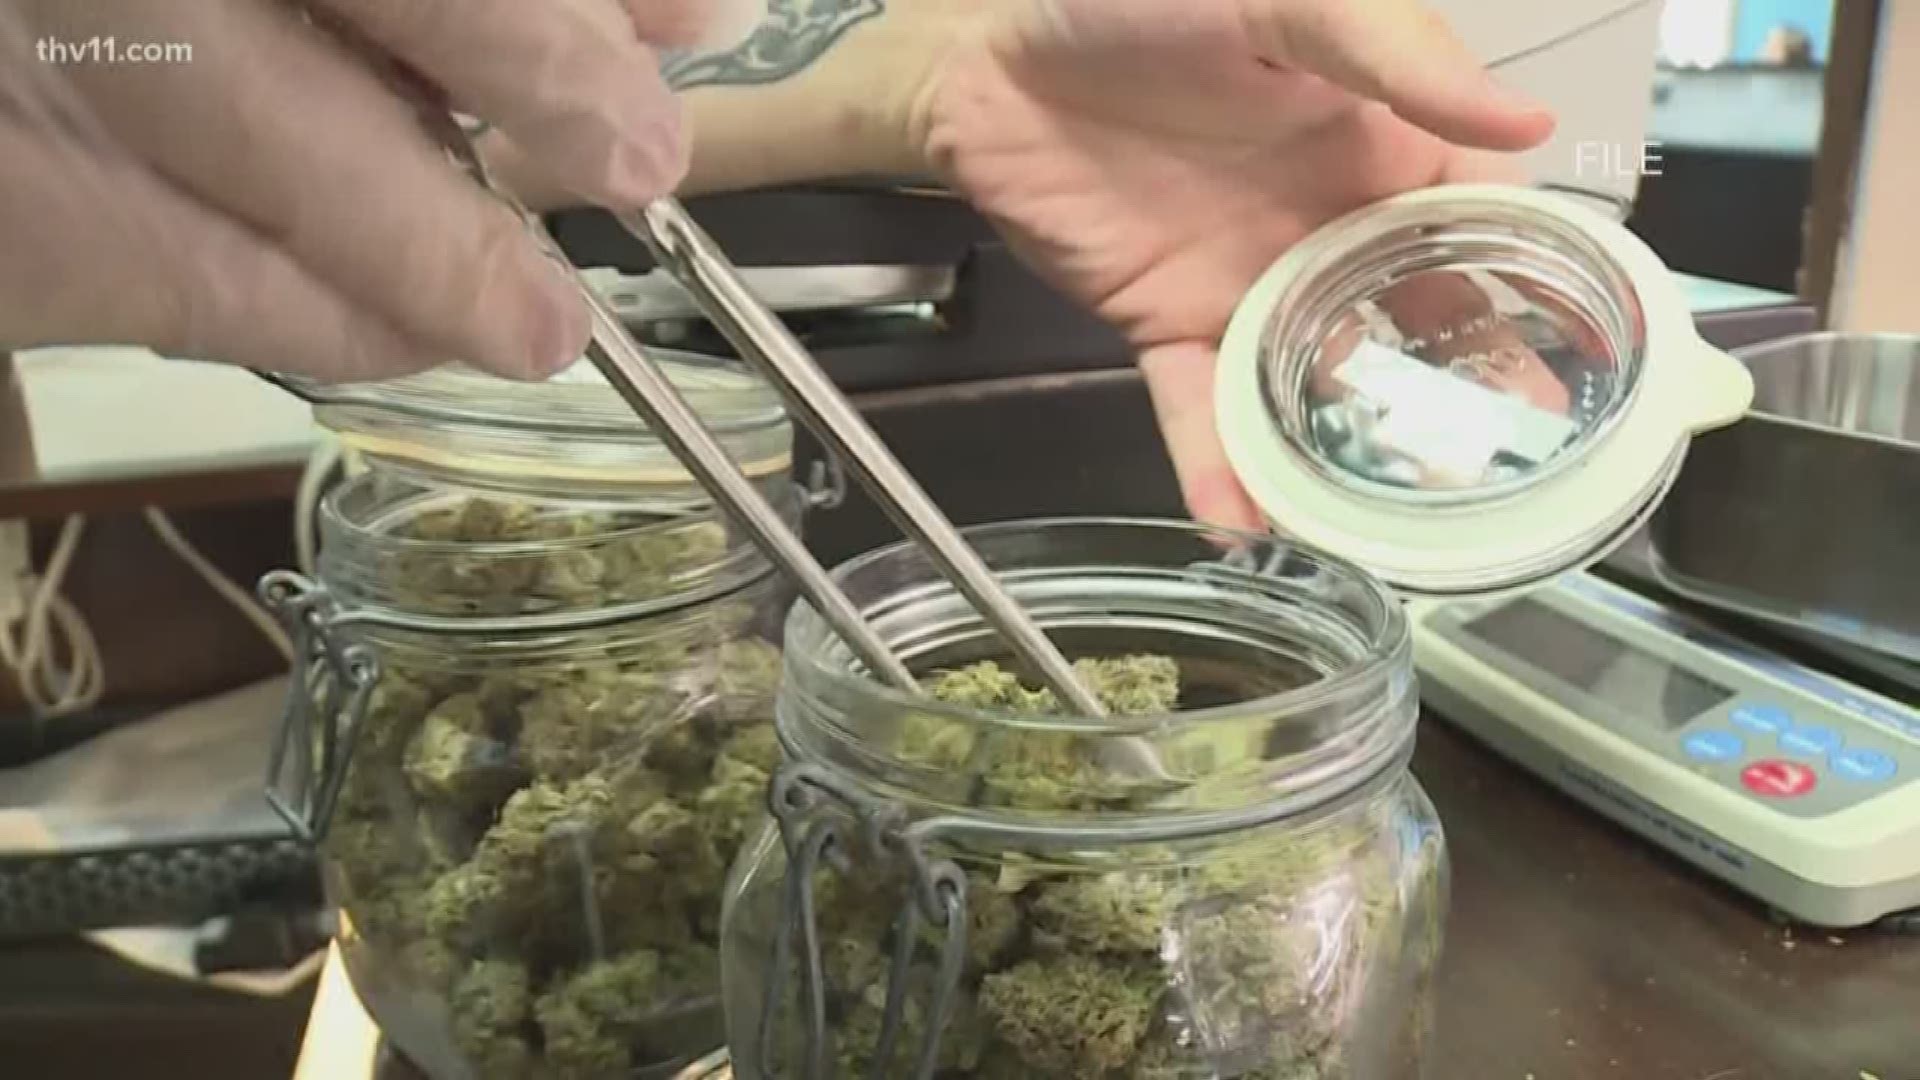 The medical marijuana commission is getting around to handing out new dispensaries, but one judge is saying, 'not so fast.'